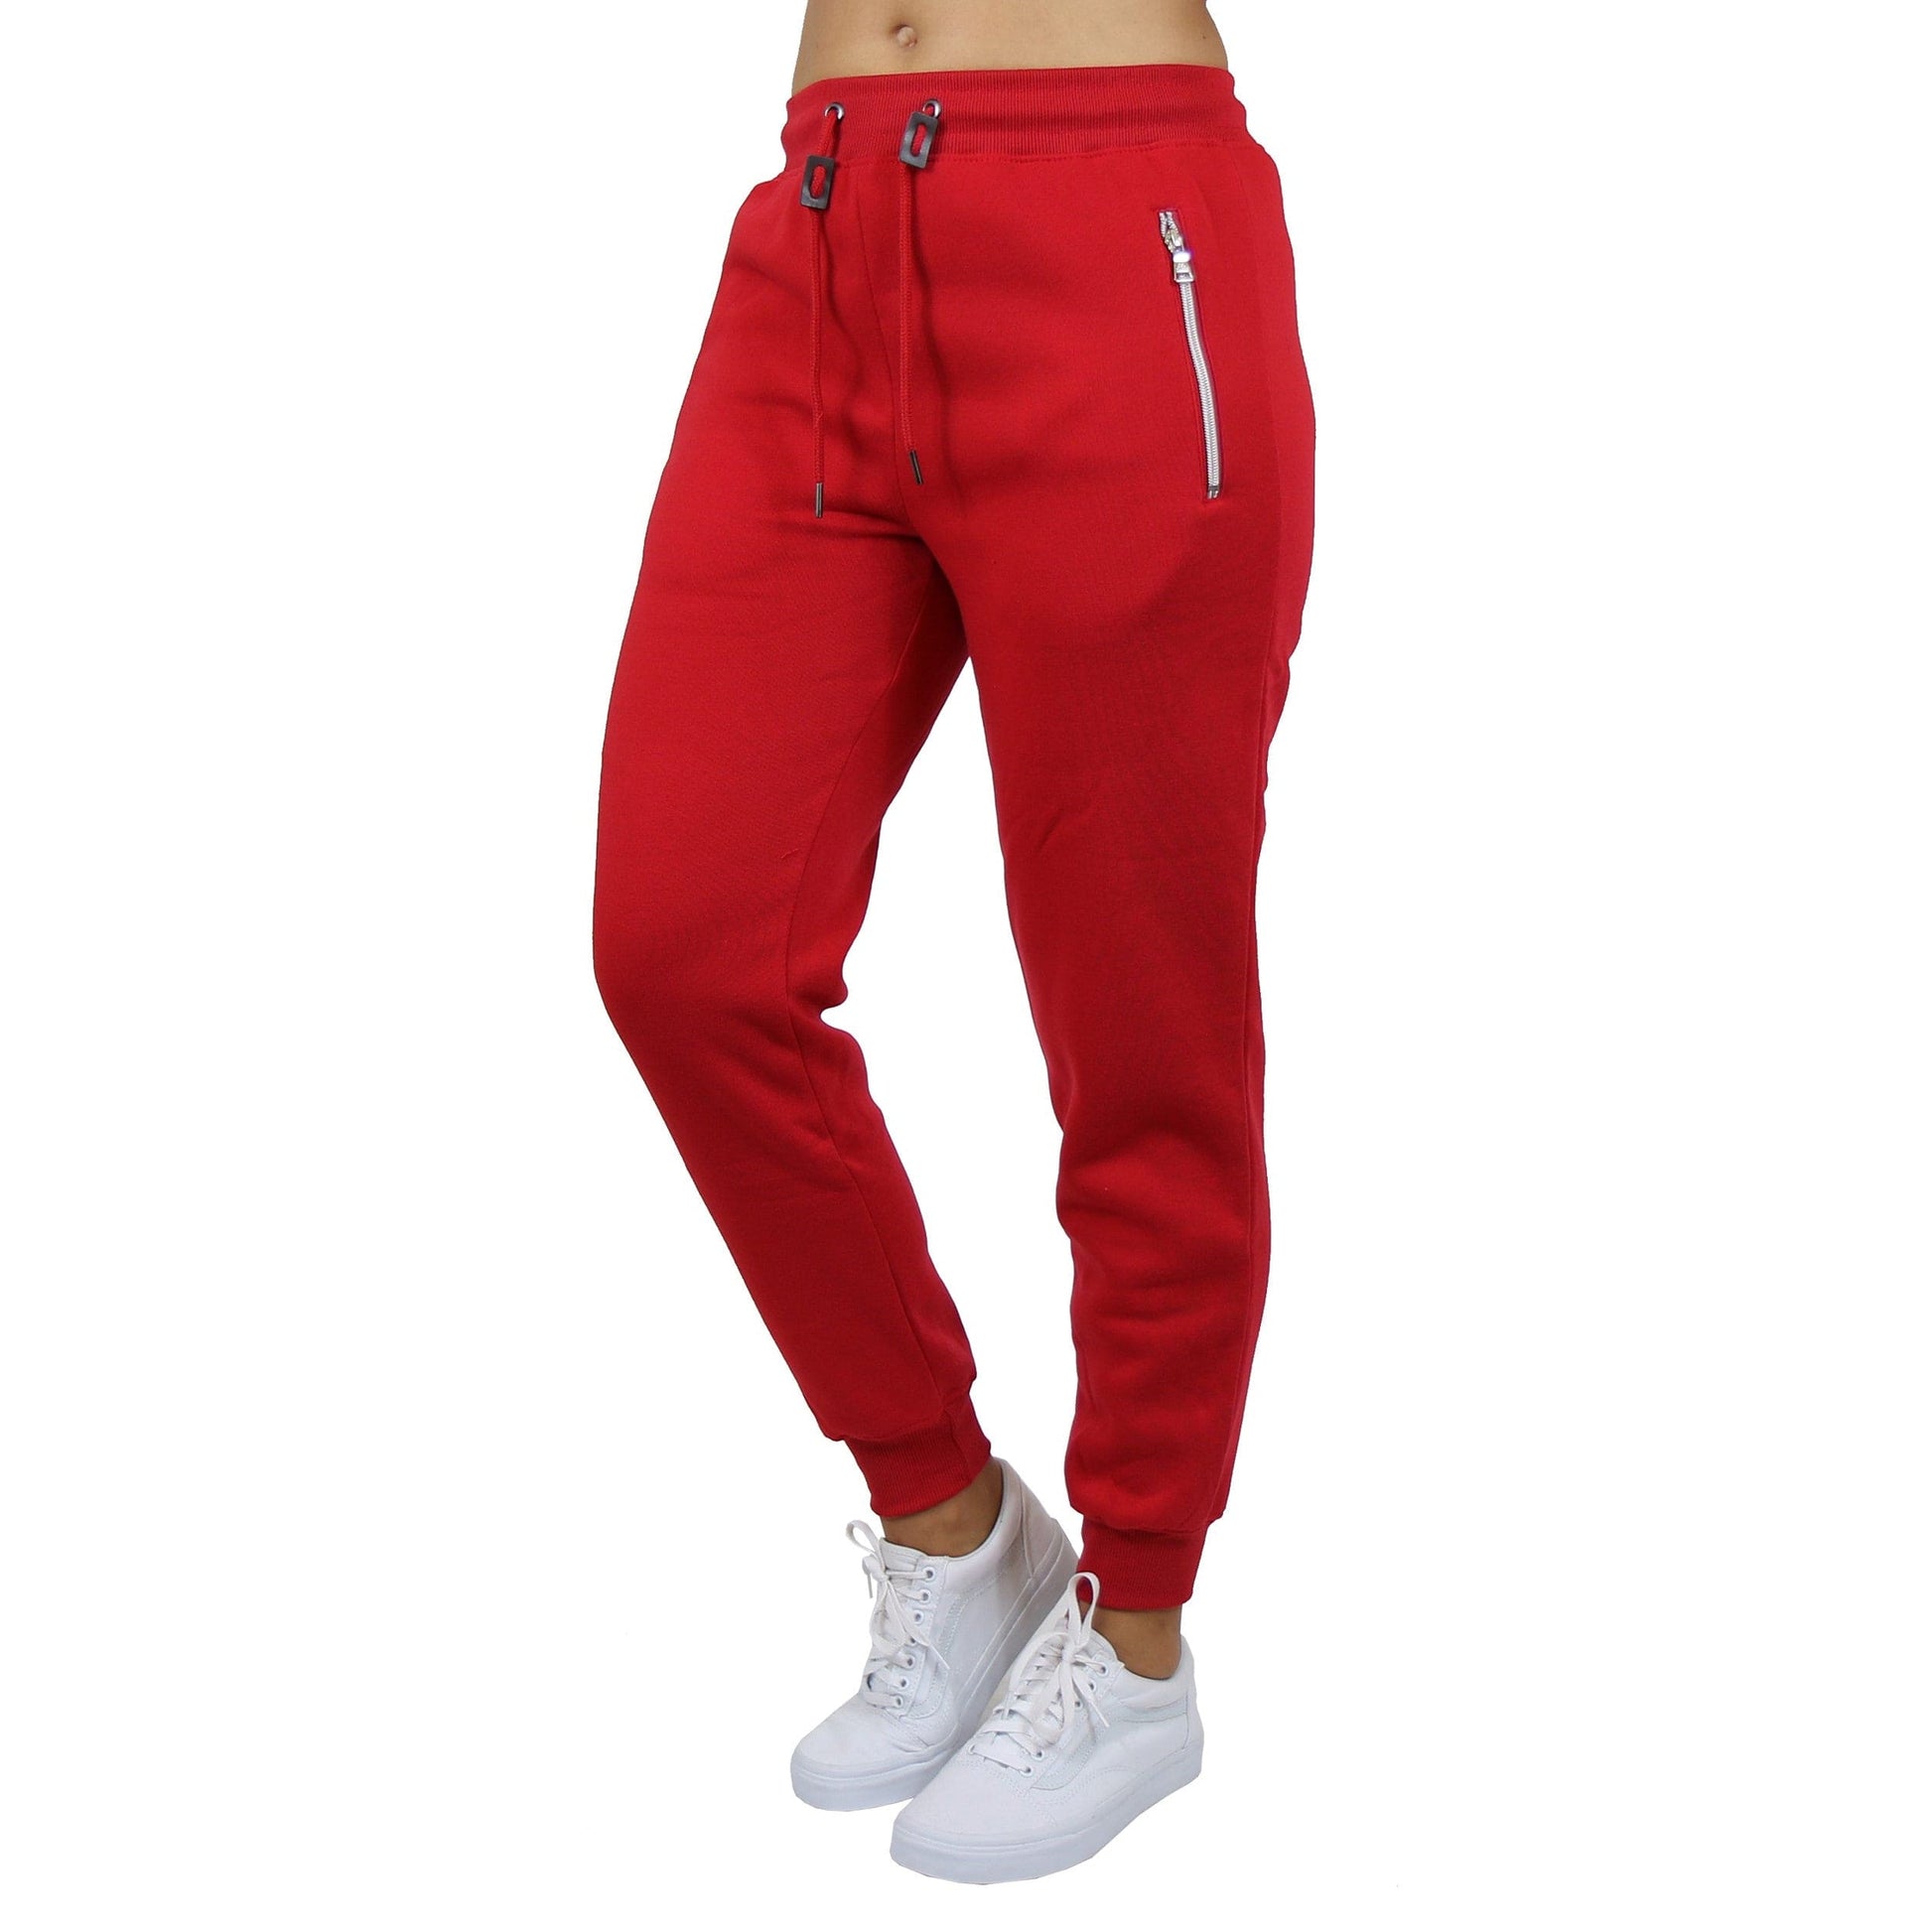 colsie Solid Red Sweatpants Size XL - 25% off